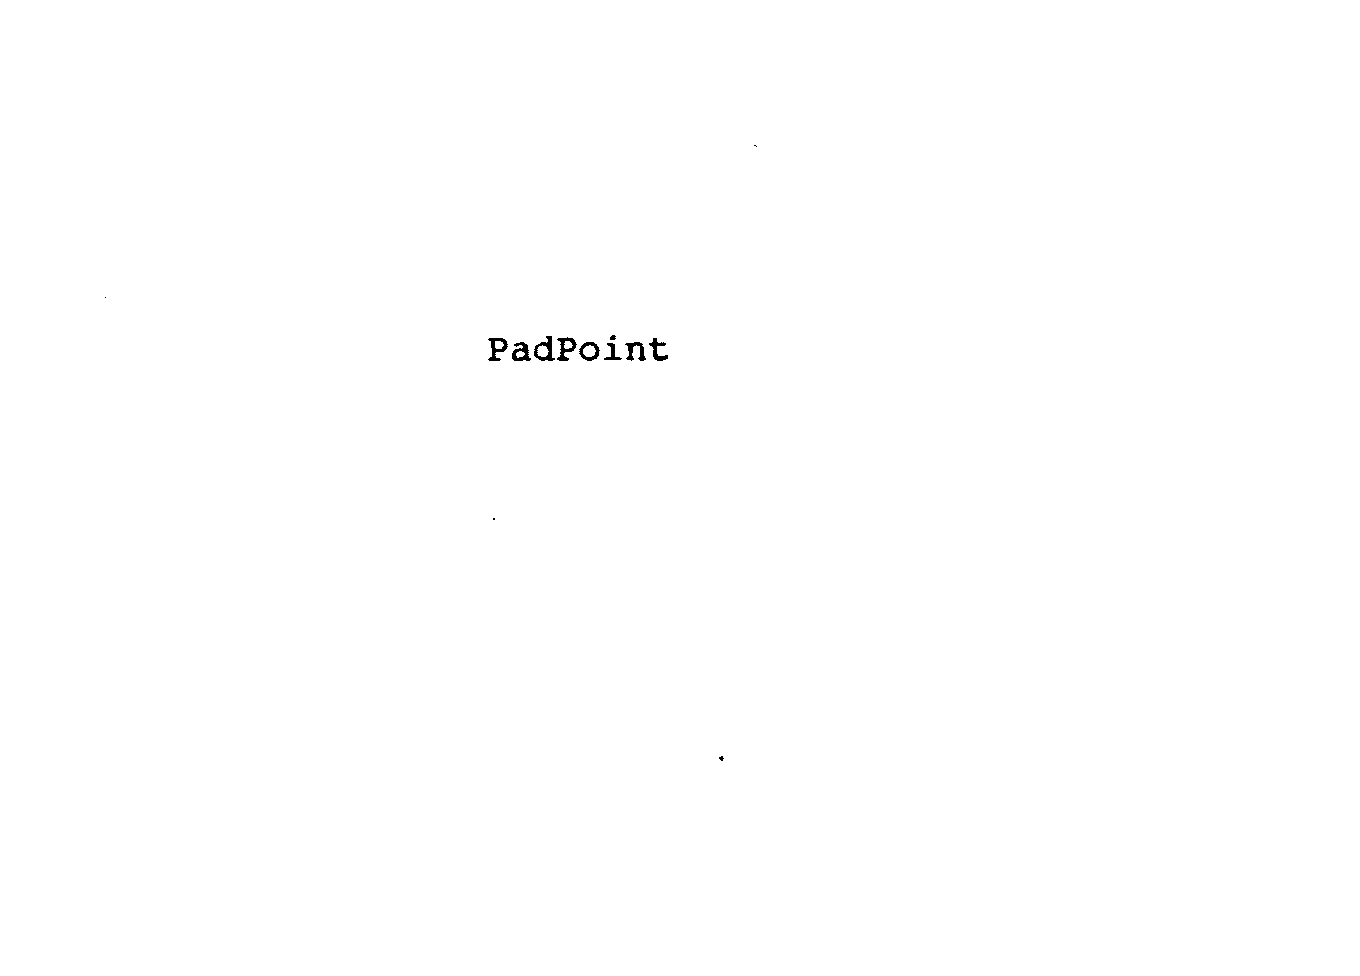  PADPOINT